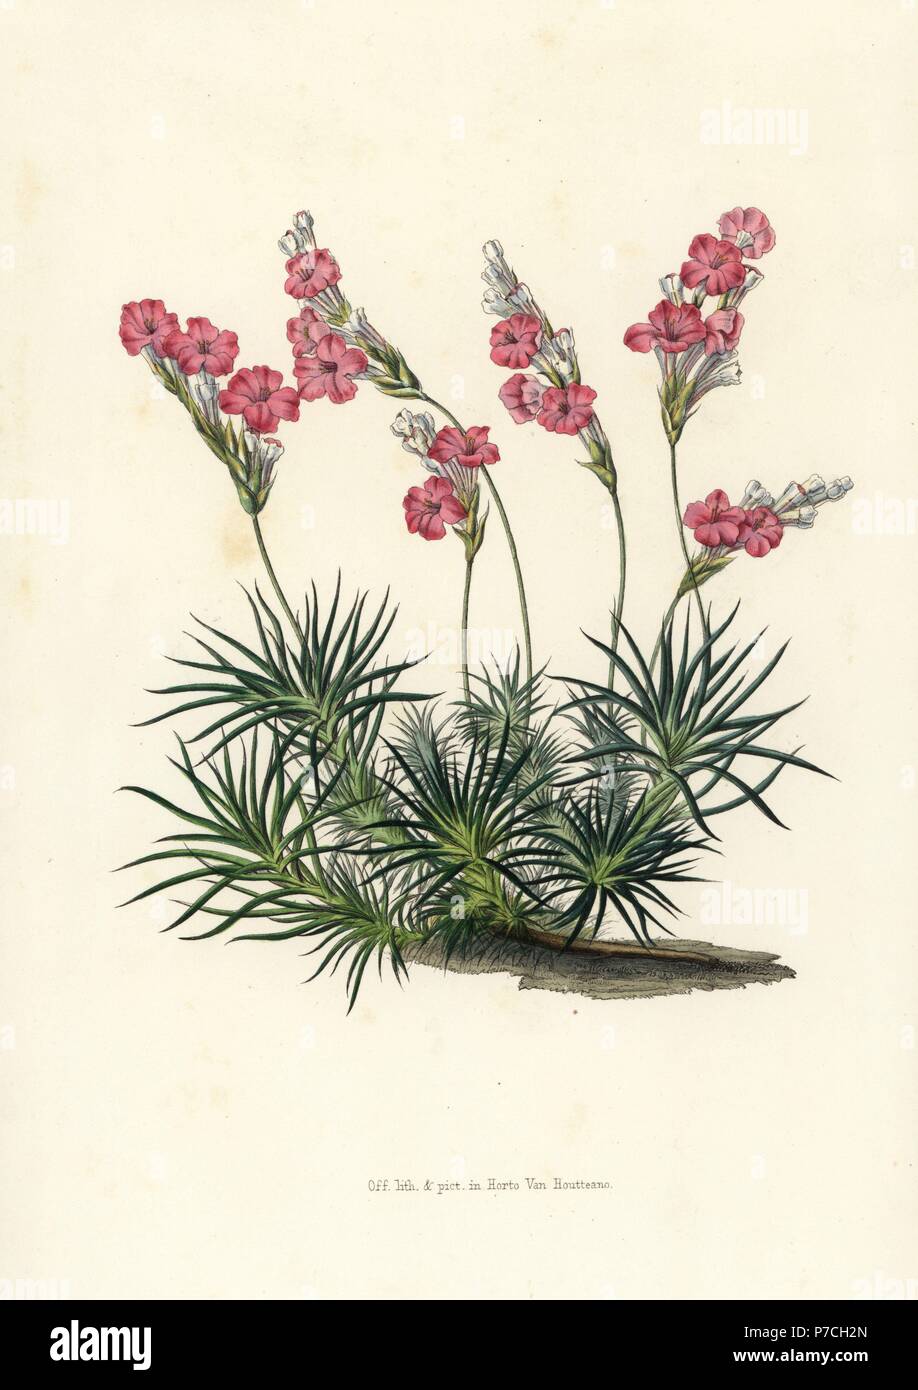 Prickly thrift, Acantholimon glumaceum. Handcoloured lithograph from Louis van Houtte and Charles Lemaire's Flowers of the Gardens and Hothouses of Europe, Flore des Serres et des Jardins de l'Europe, Ghent, Belgium, 1851. Stock Photo